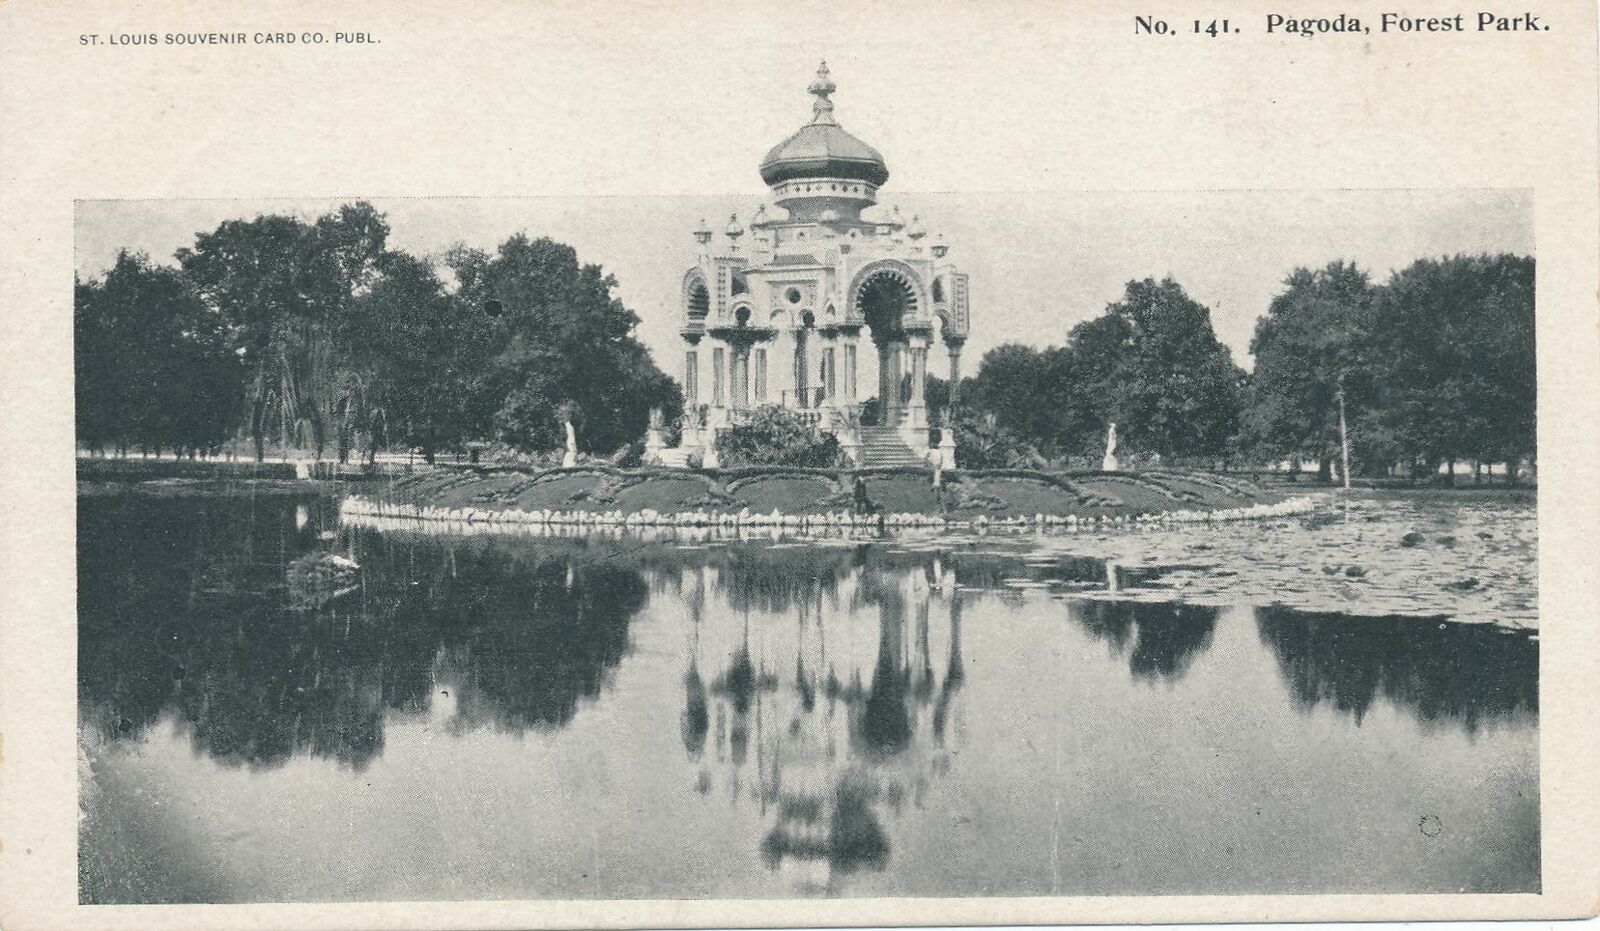 ST. LOUIS MO - Forest Park Pagoda Private Mailing Card (1898-1901)